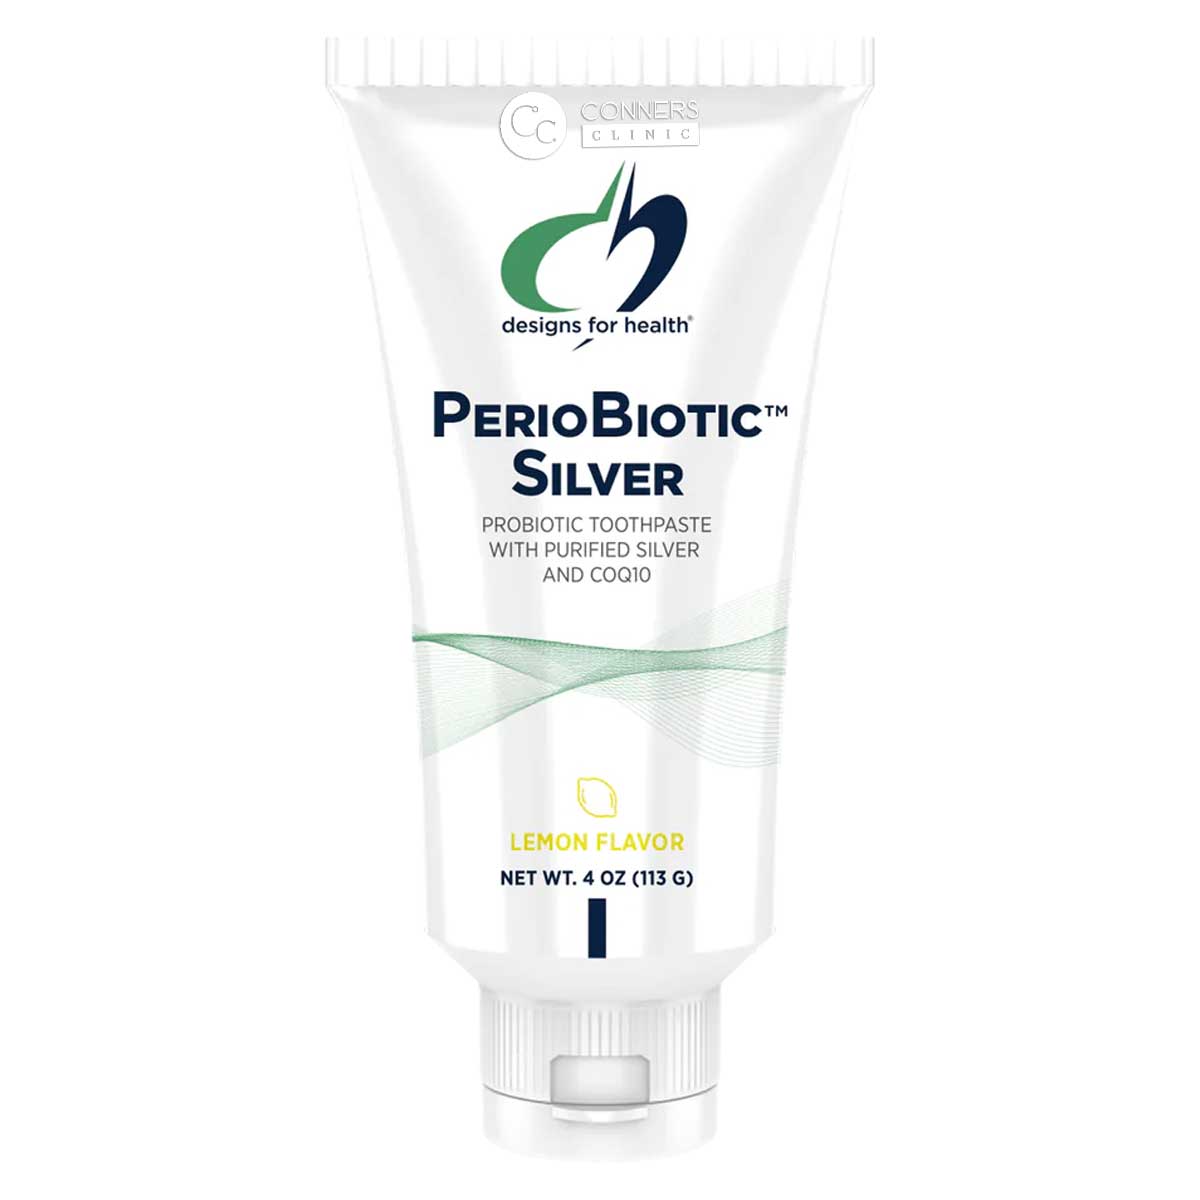 PerioBiotic Silver Toothpaste.    * Designs for Health Supplement - Conners Clinic